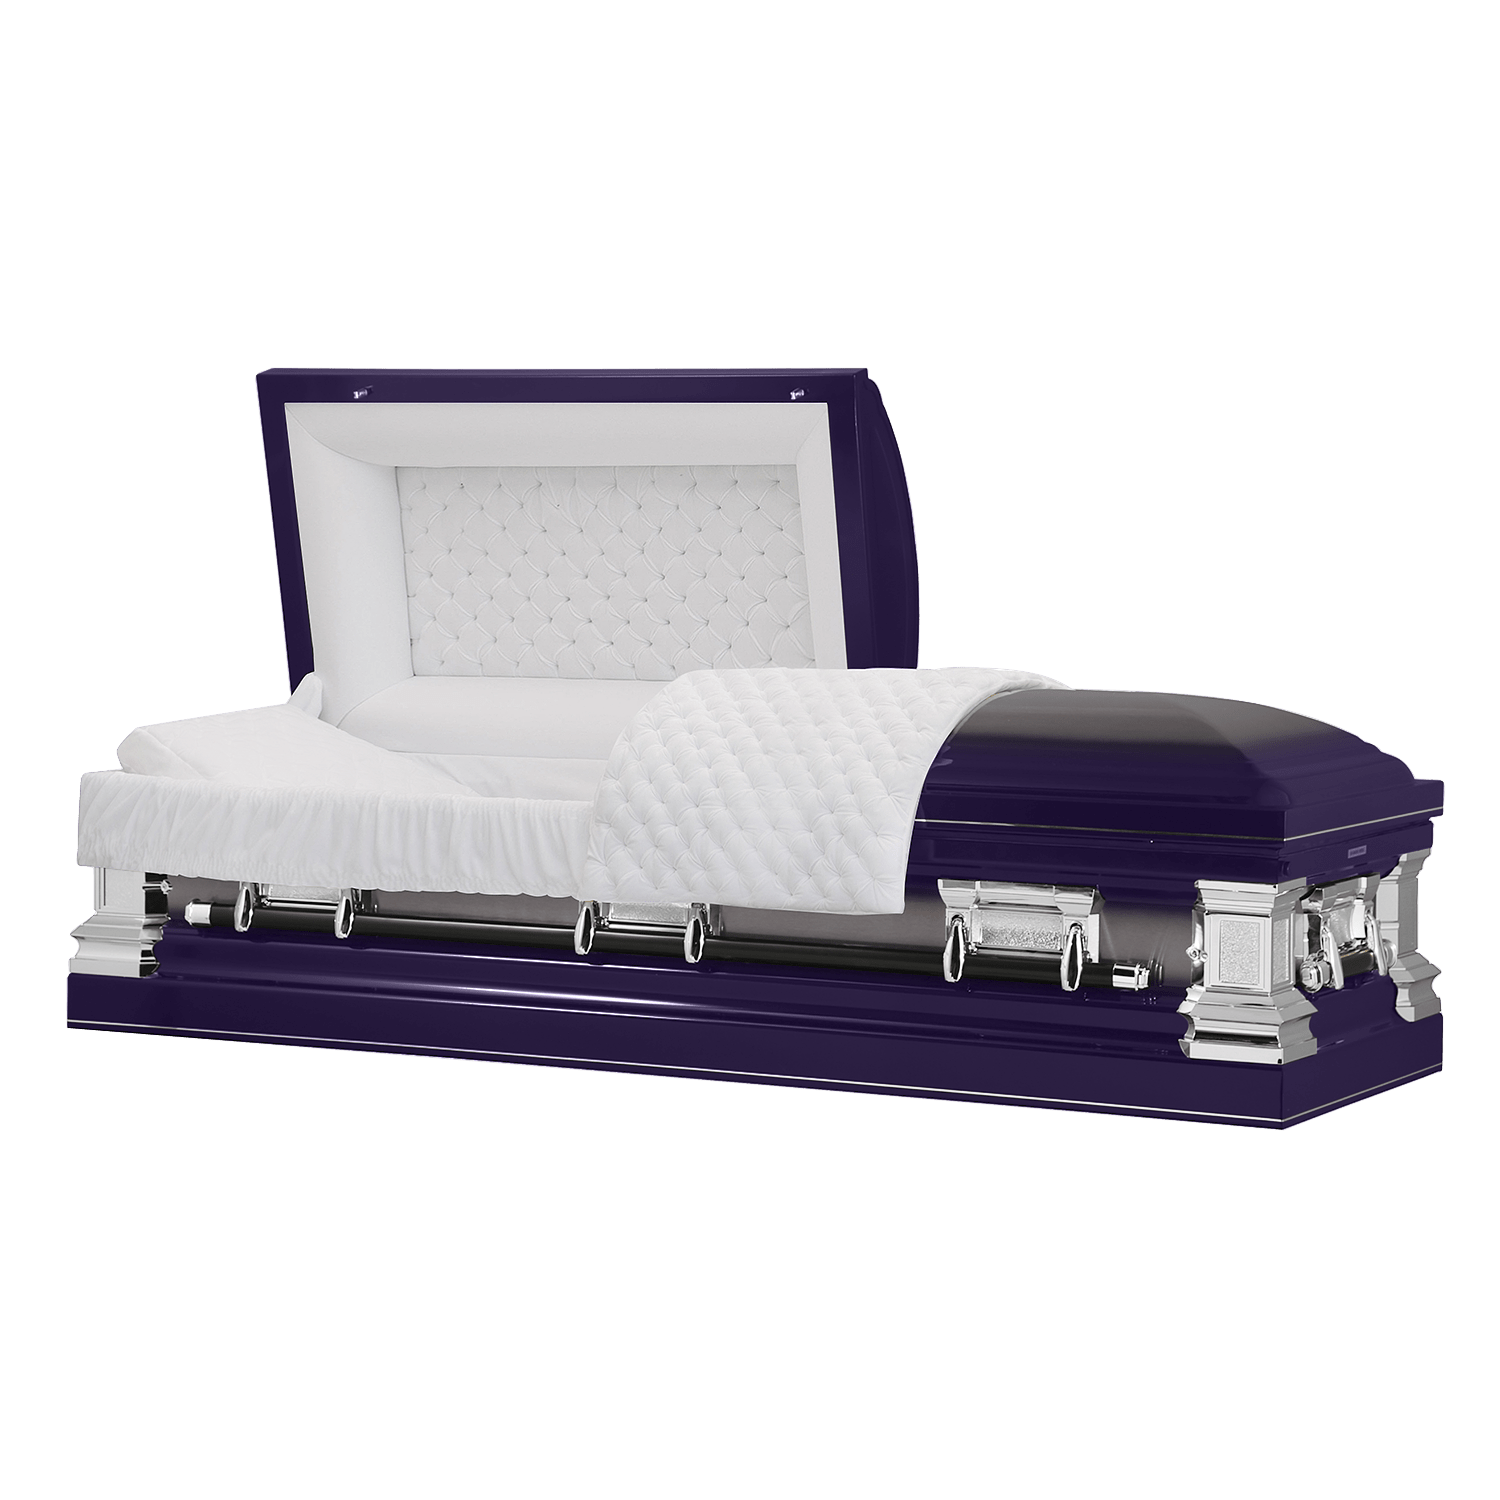 Load image into Gallery viewer, Era Series | Royal Purple Stainless Steel Casket with White Interior - Titan Casket
